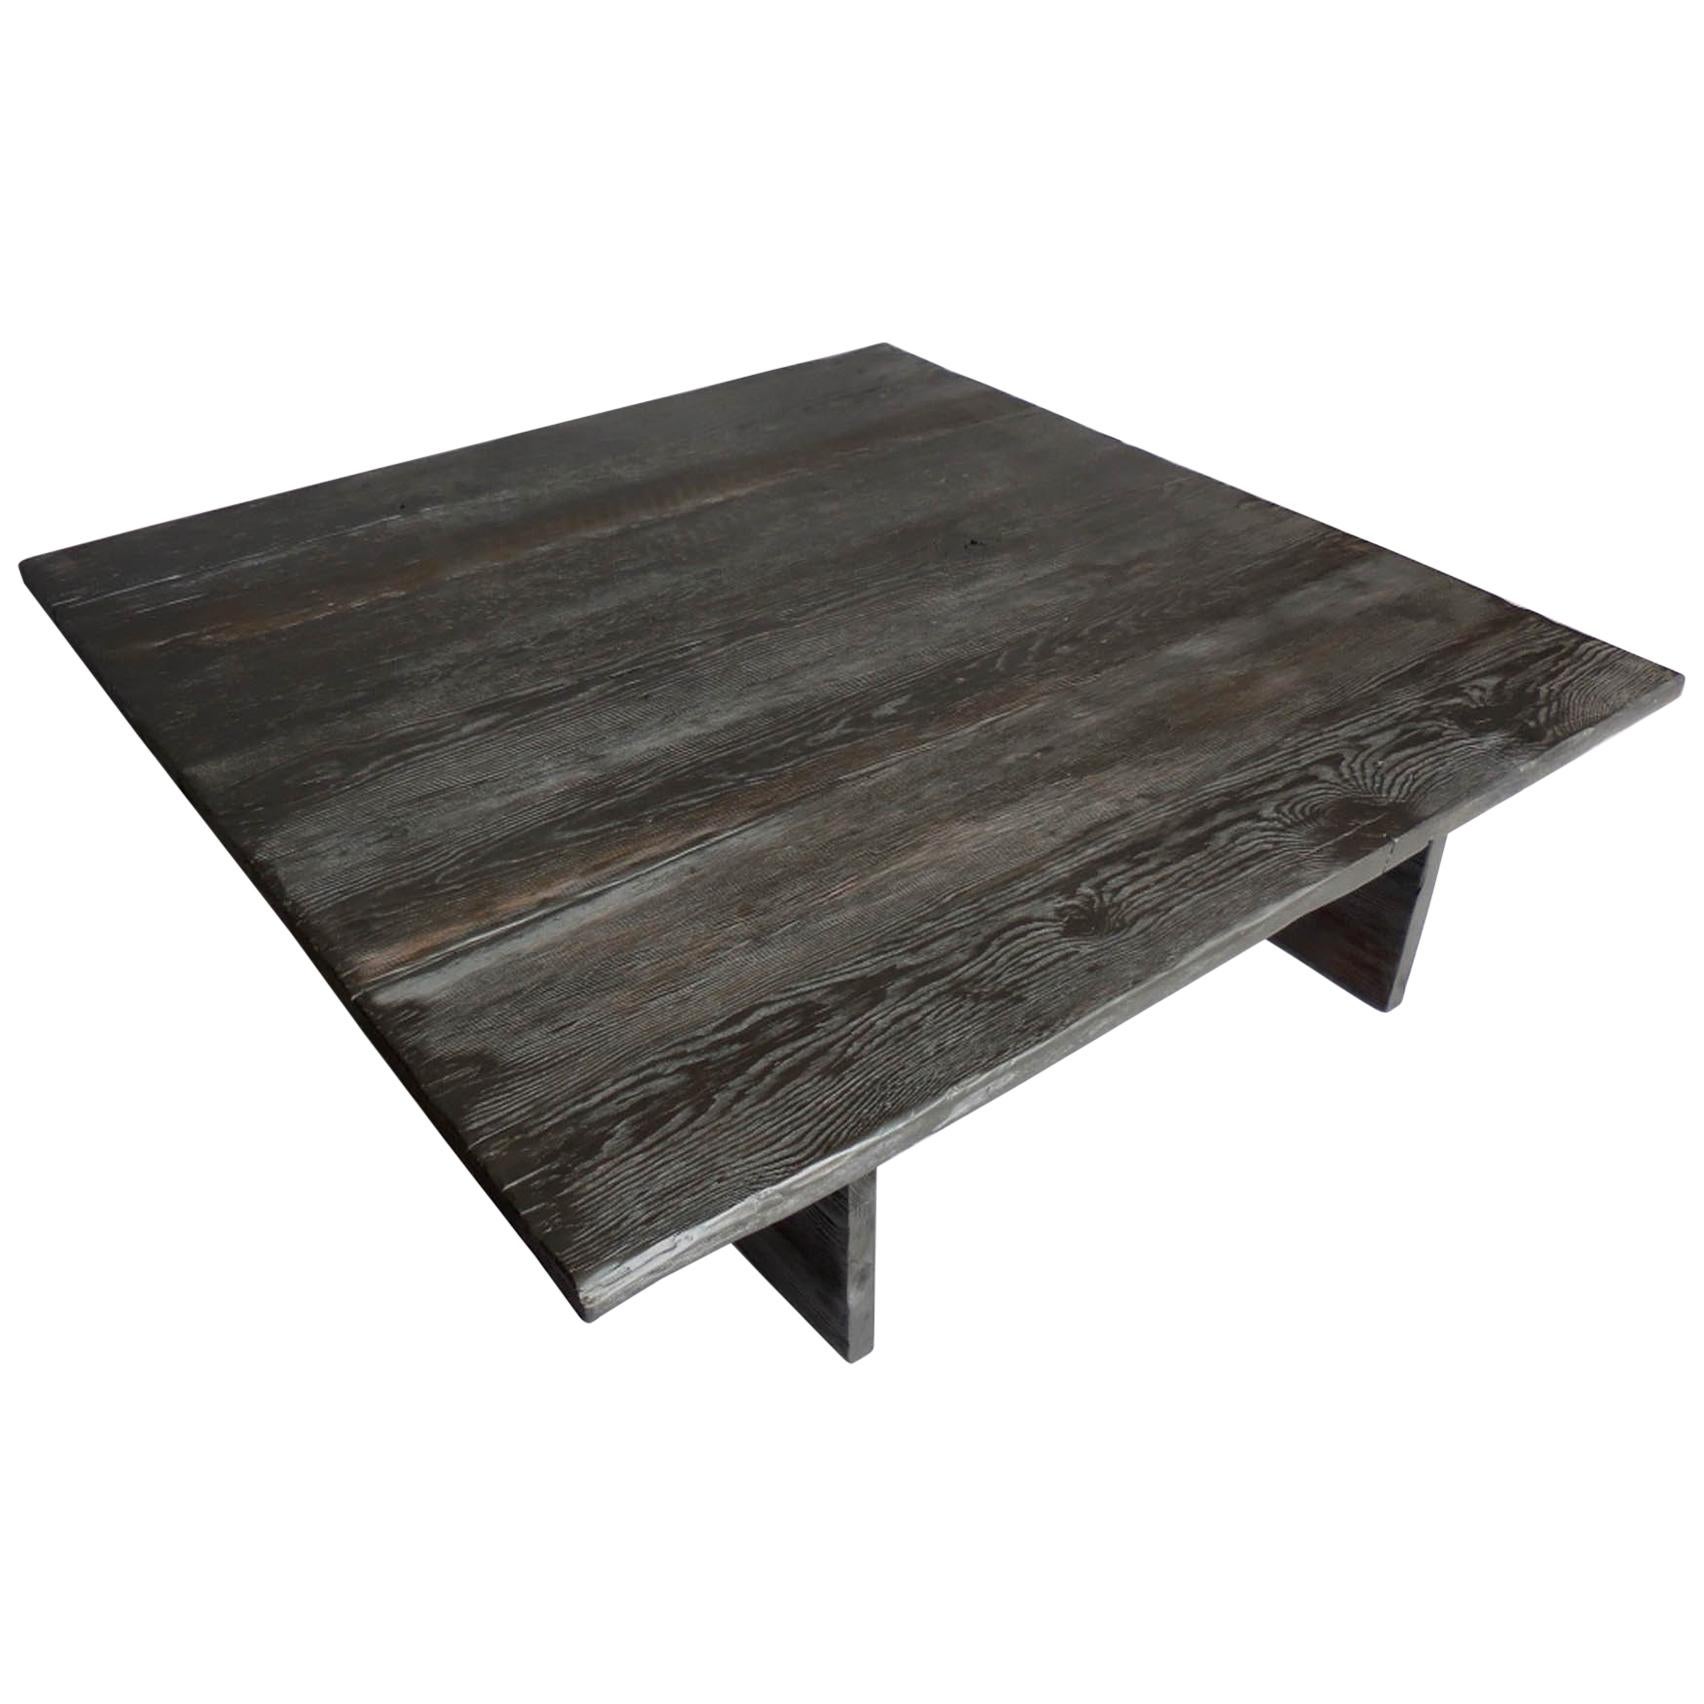 Custom, rustic coffee table made from douglas fir. Can be made in any size and in a range of finishes. As shown in a heavily distressed, open grain espresso finish.
Made in Los Angeles by Dos Gallos.
CUSTOM PRICES ARE SUBJECT TO CHANGE DUE TO